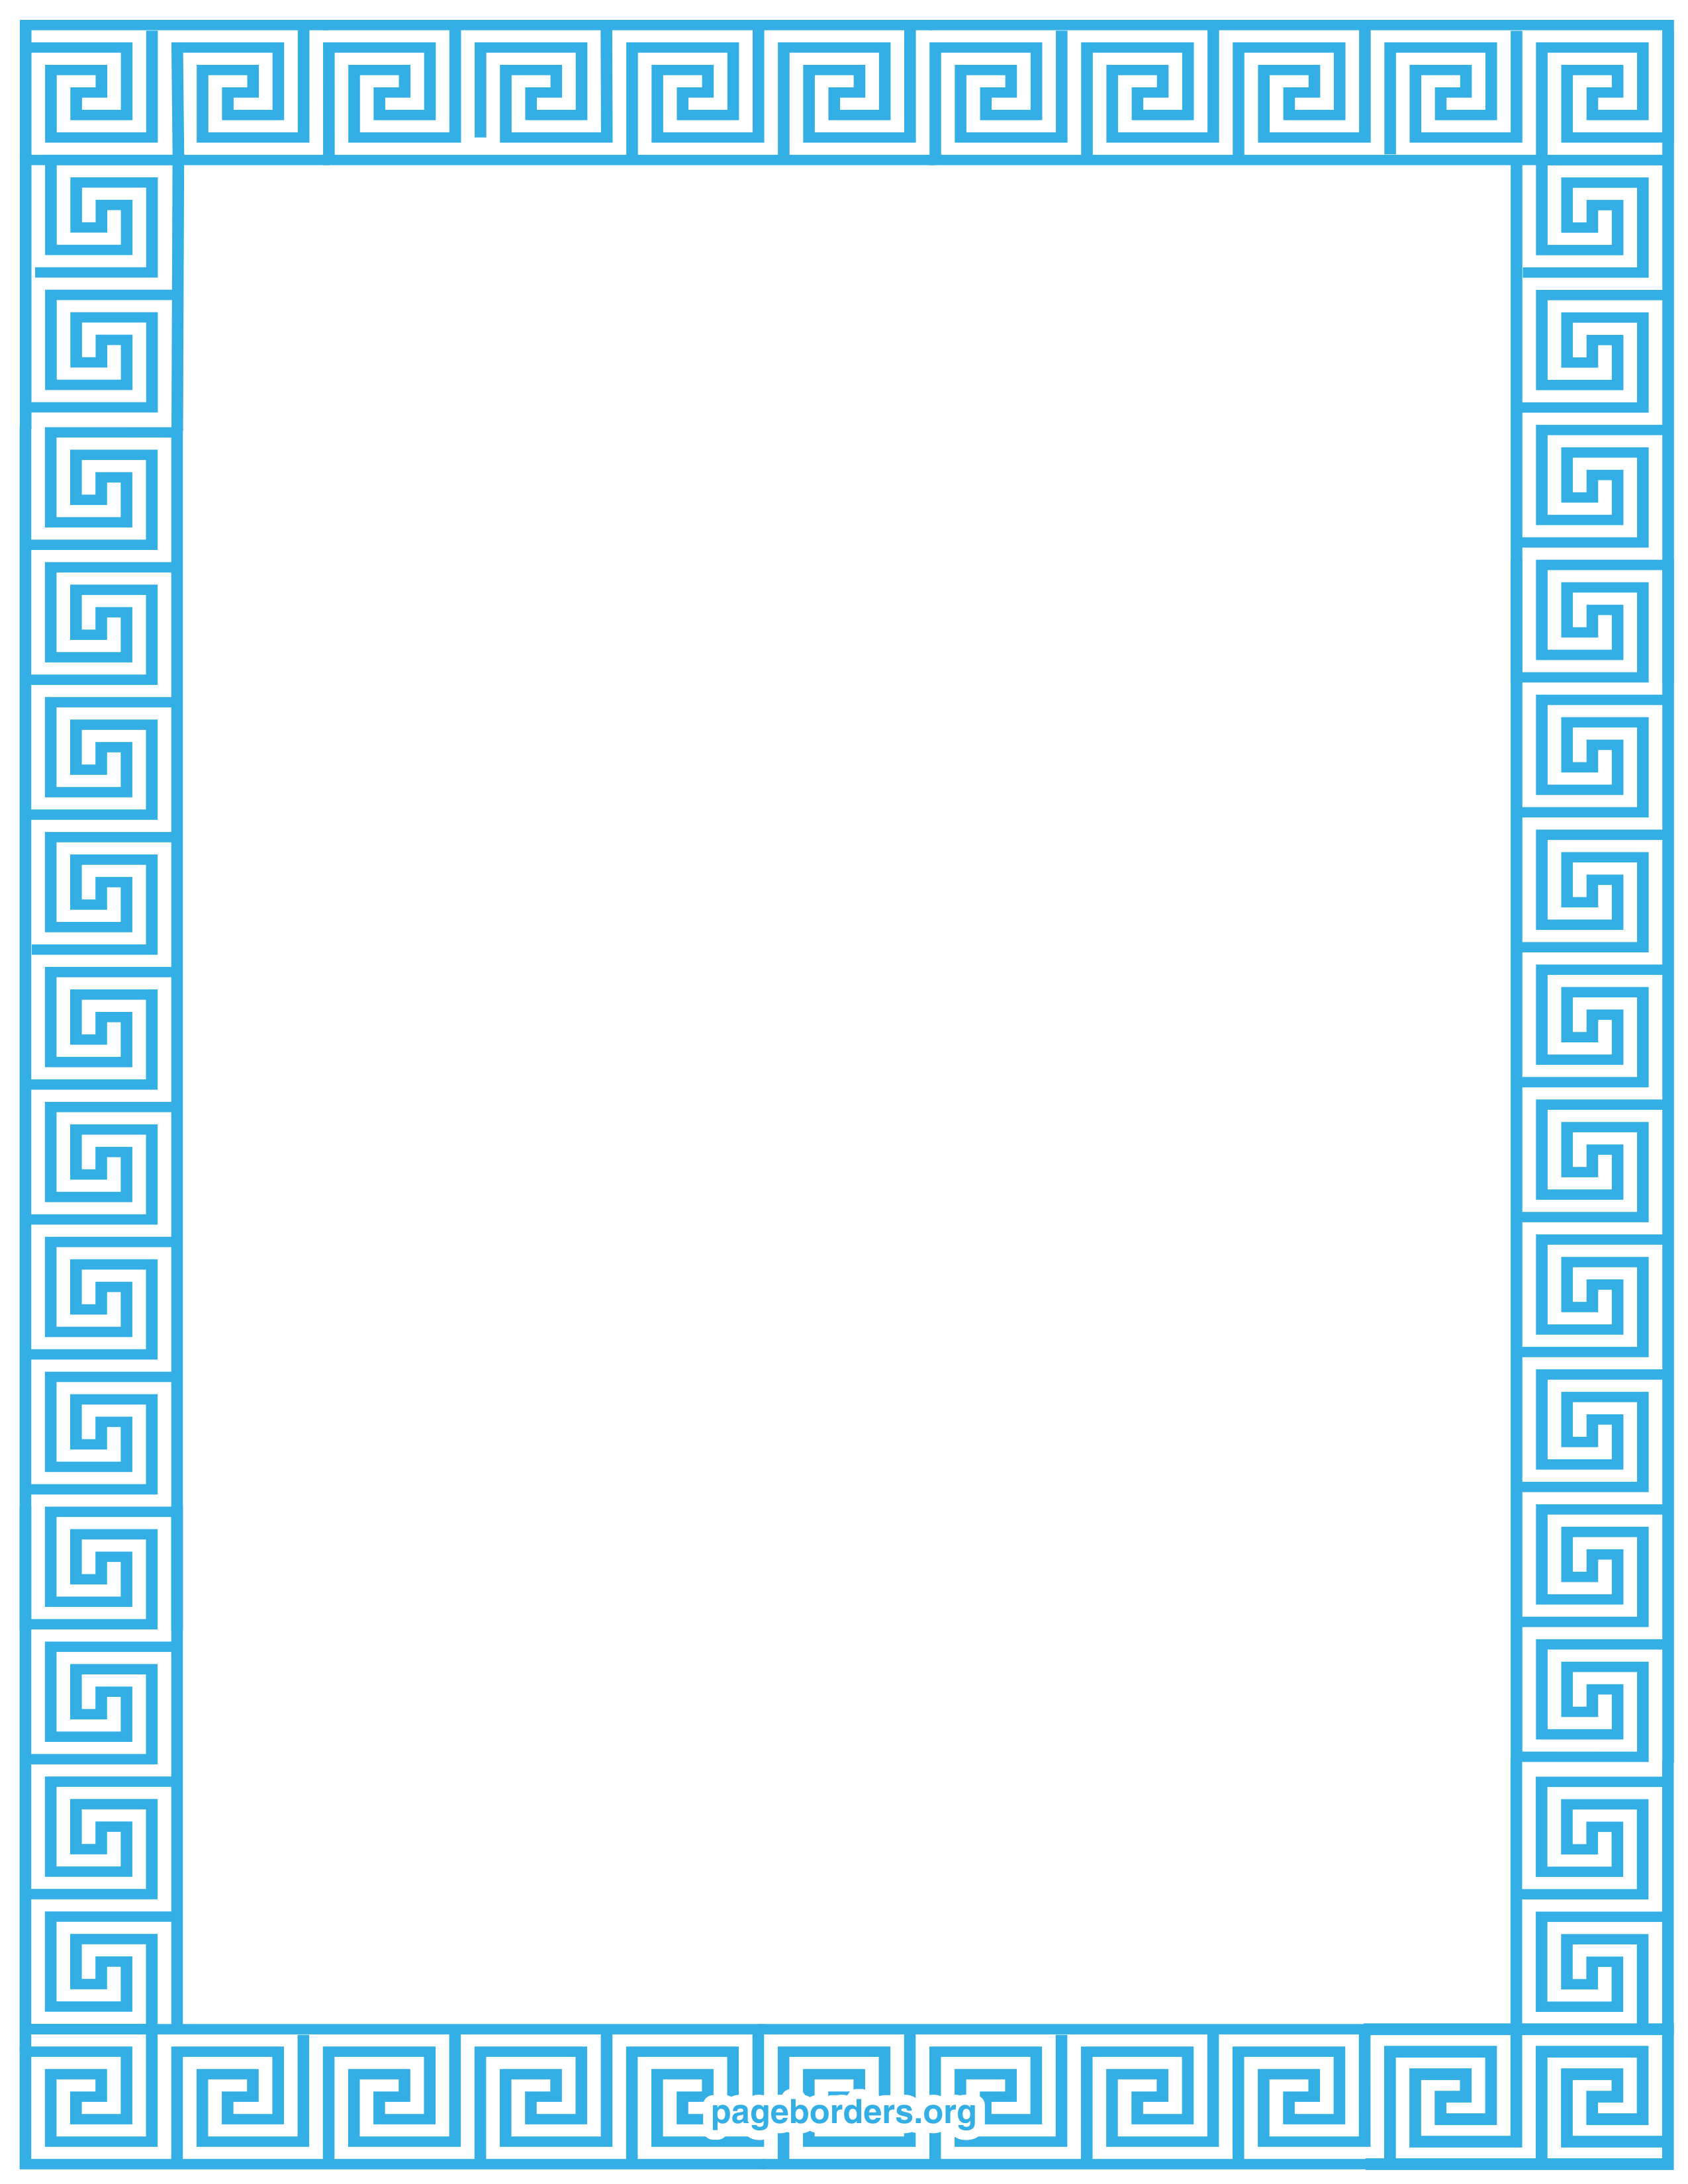 Ancient Greek Border Patterns - Clipart library